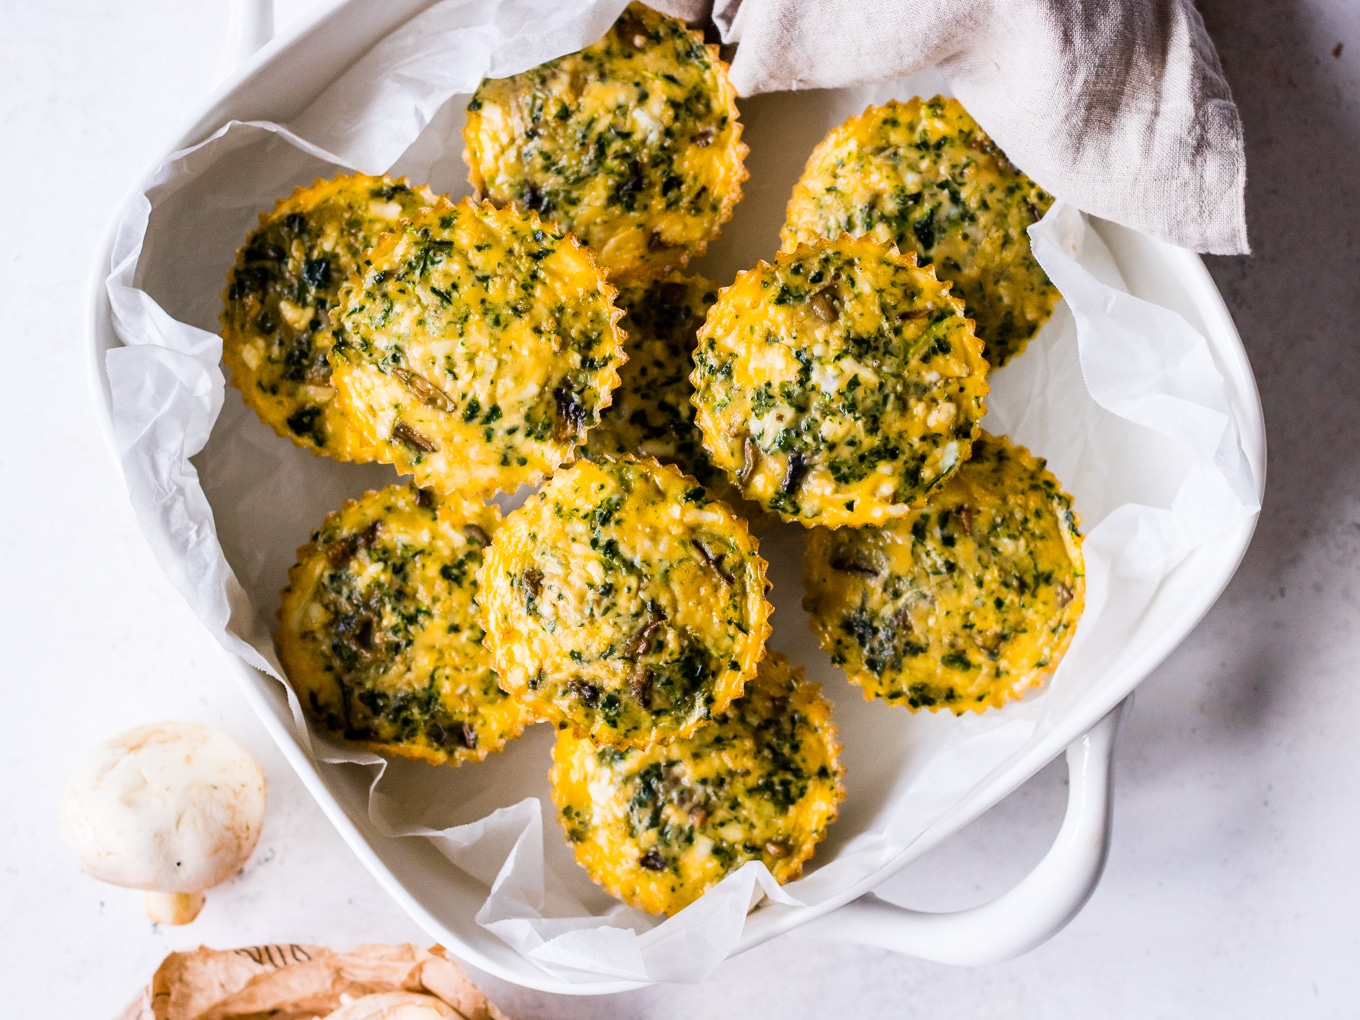 Vegetable Halloumi Egg Muffins Recipe on Nourish Every Day